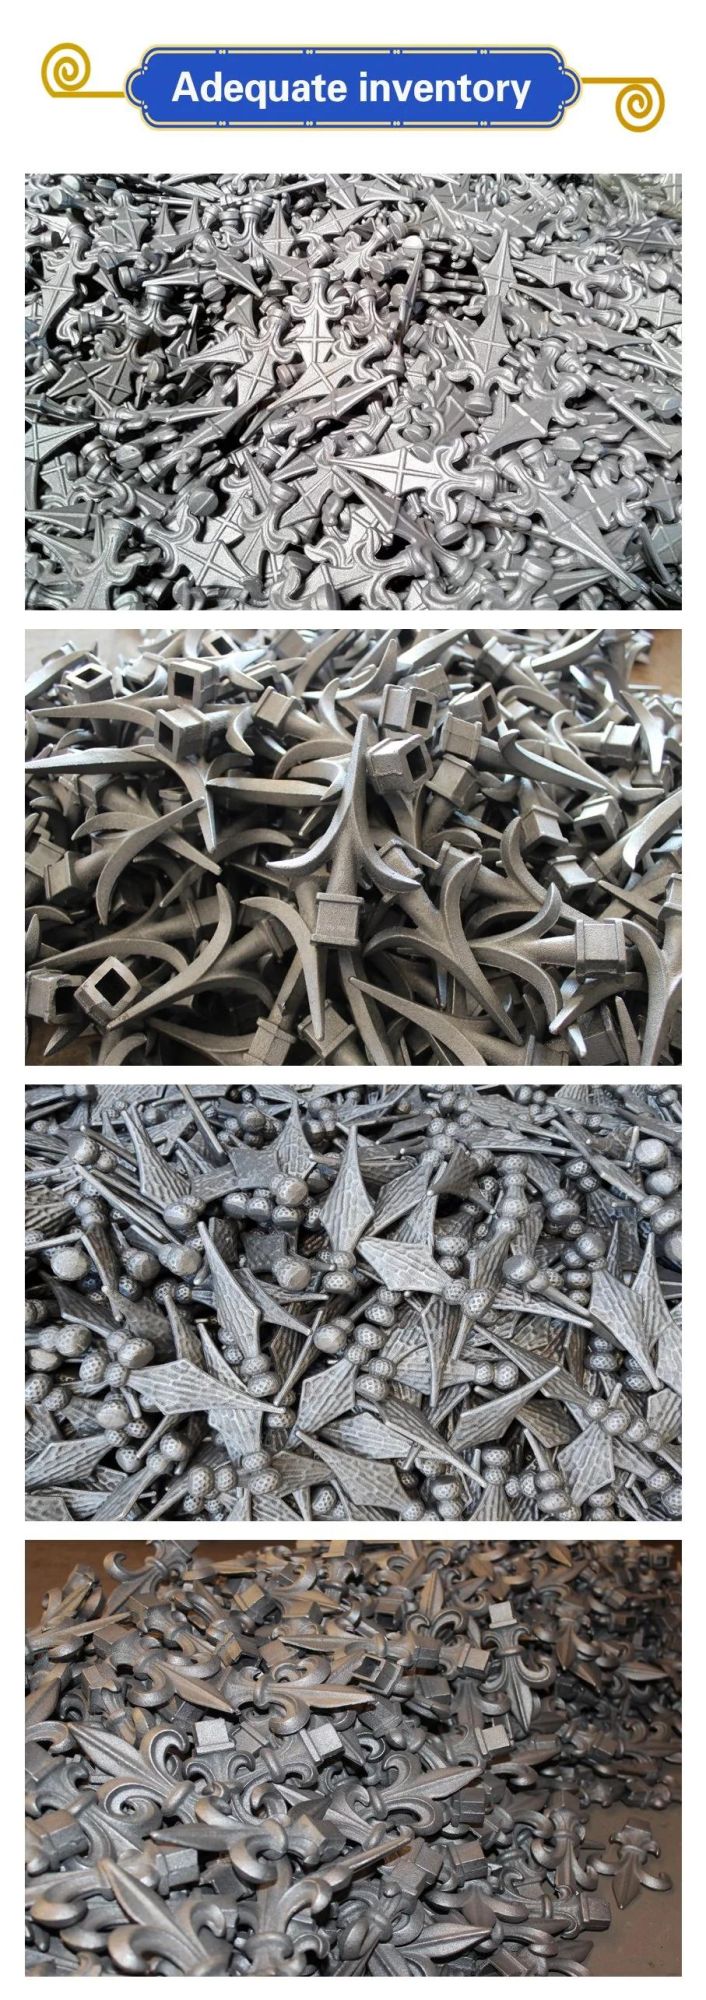 OEM Ornamental Assembled Safety Fence Gate Accessories Cast Iron Fencing Spearheads for Garden Decoration